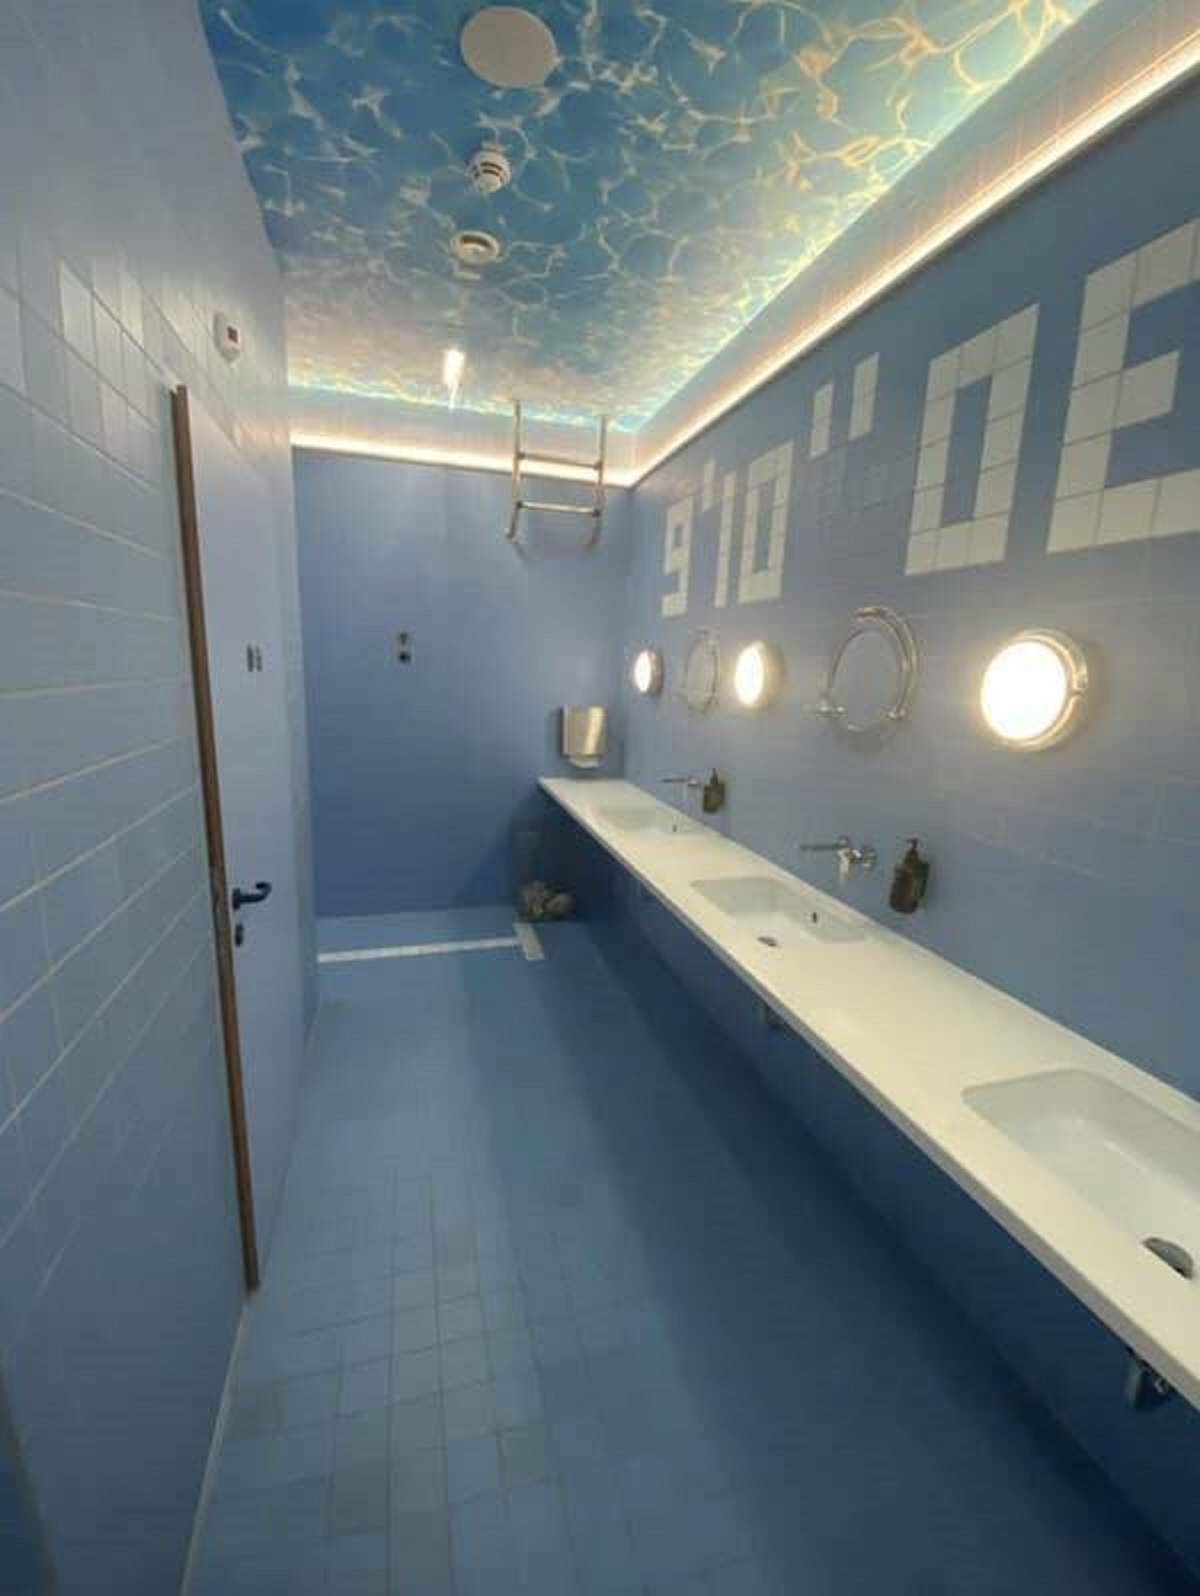 The pool-themed bathroom at a hotel in Vienna is so visually pleasing to me.